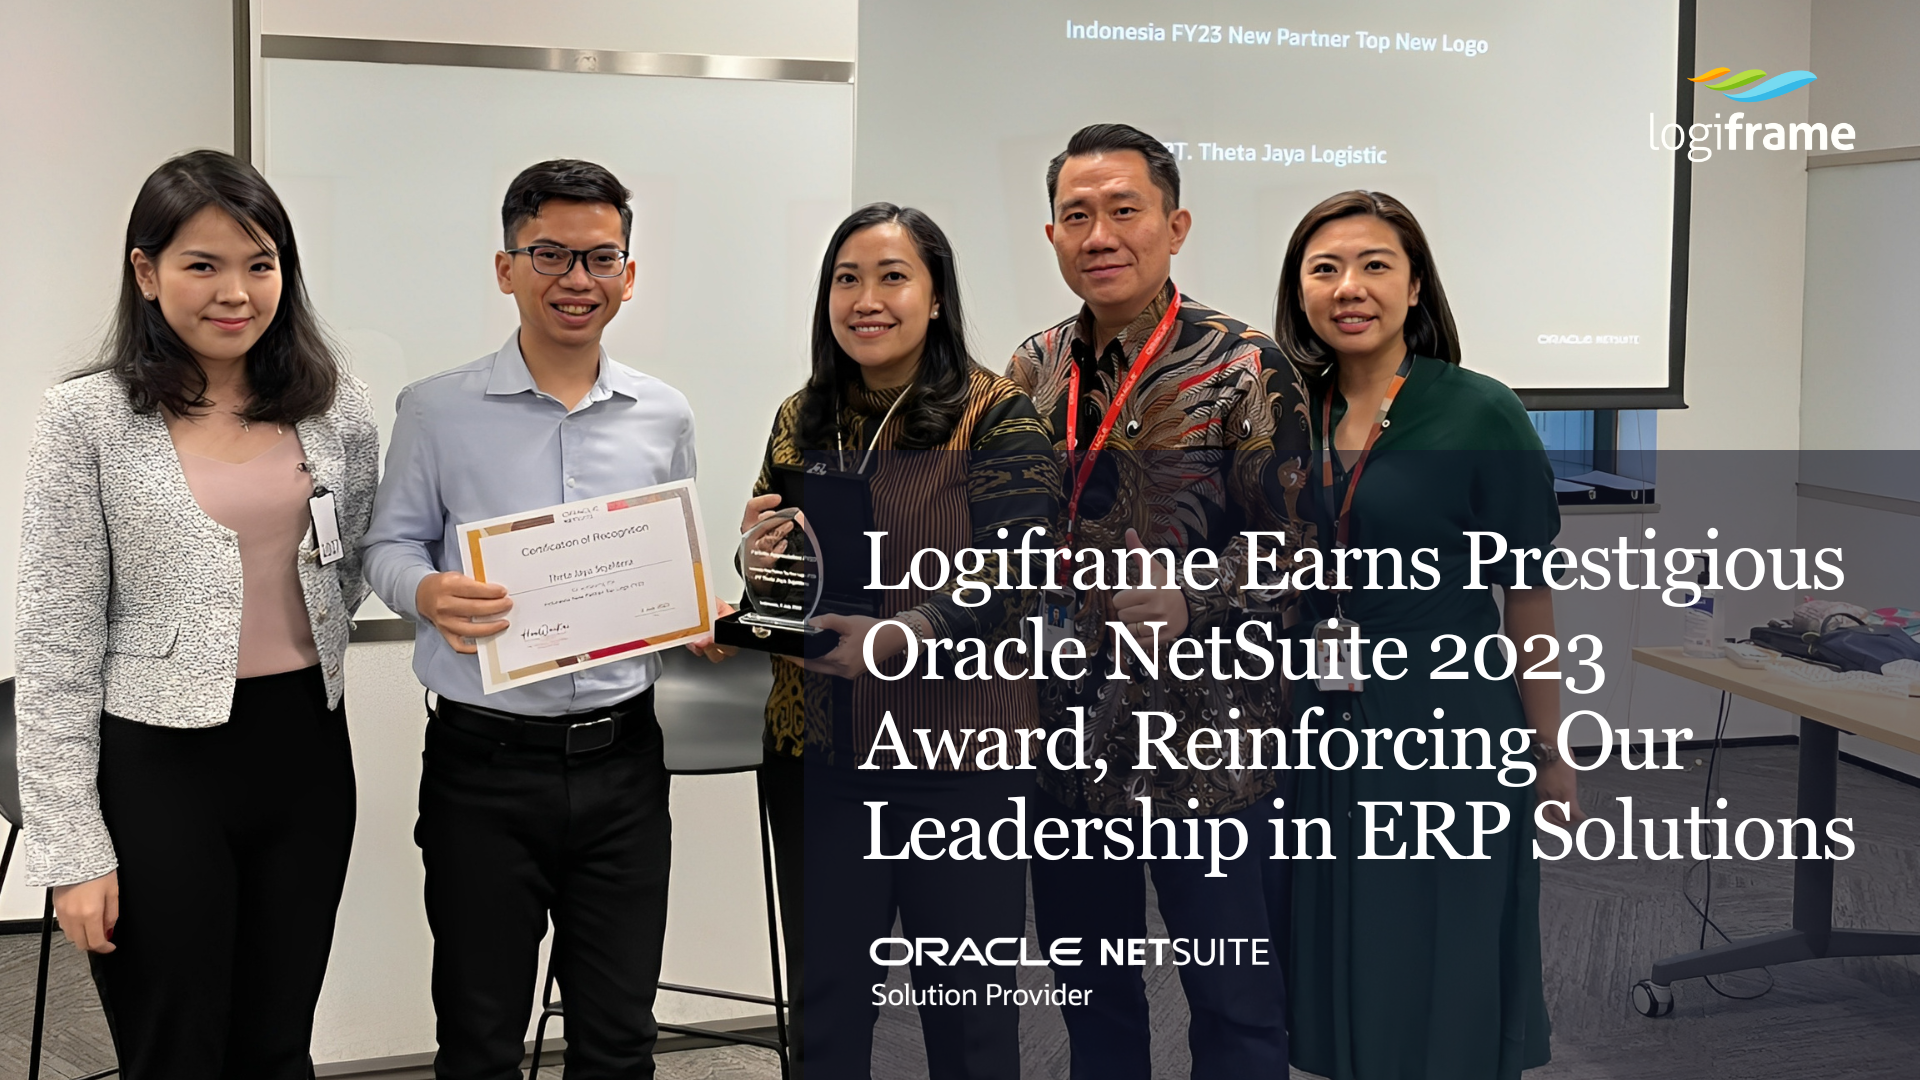 Logiframe Earns Prestigious Oracle NetSuite 2023 Award, Reinforcing Our Leadership in ERP Solutions